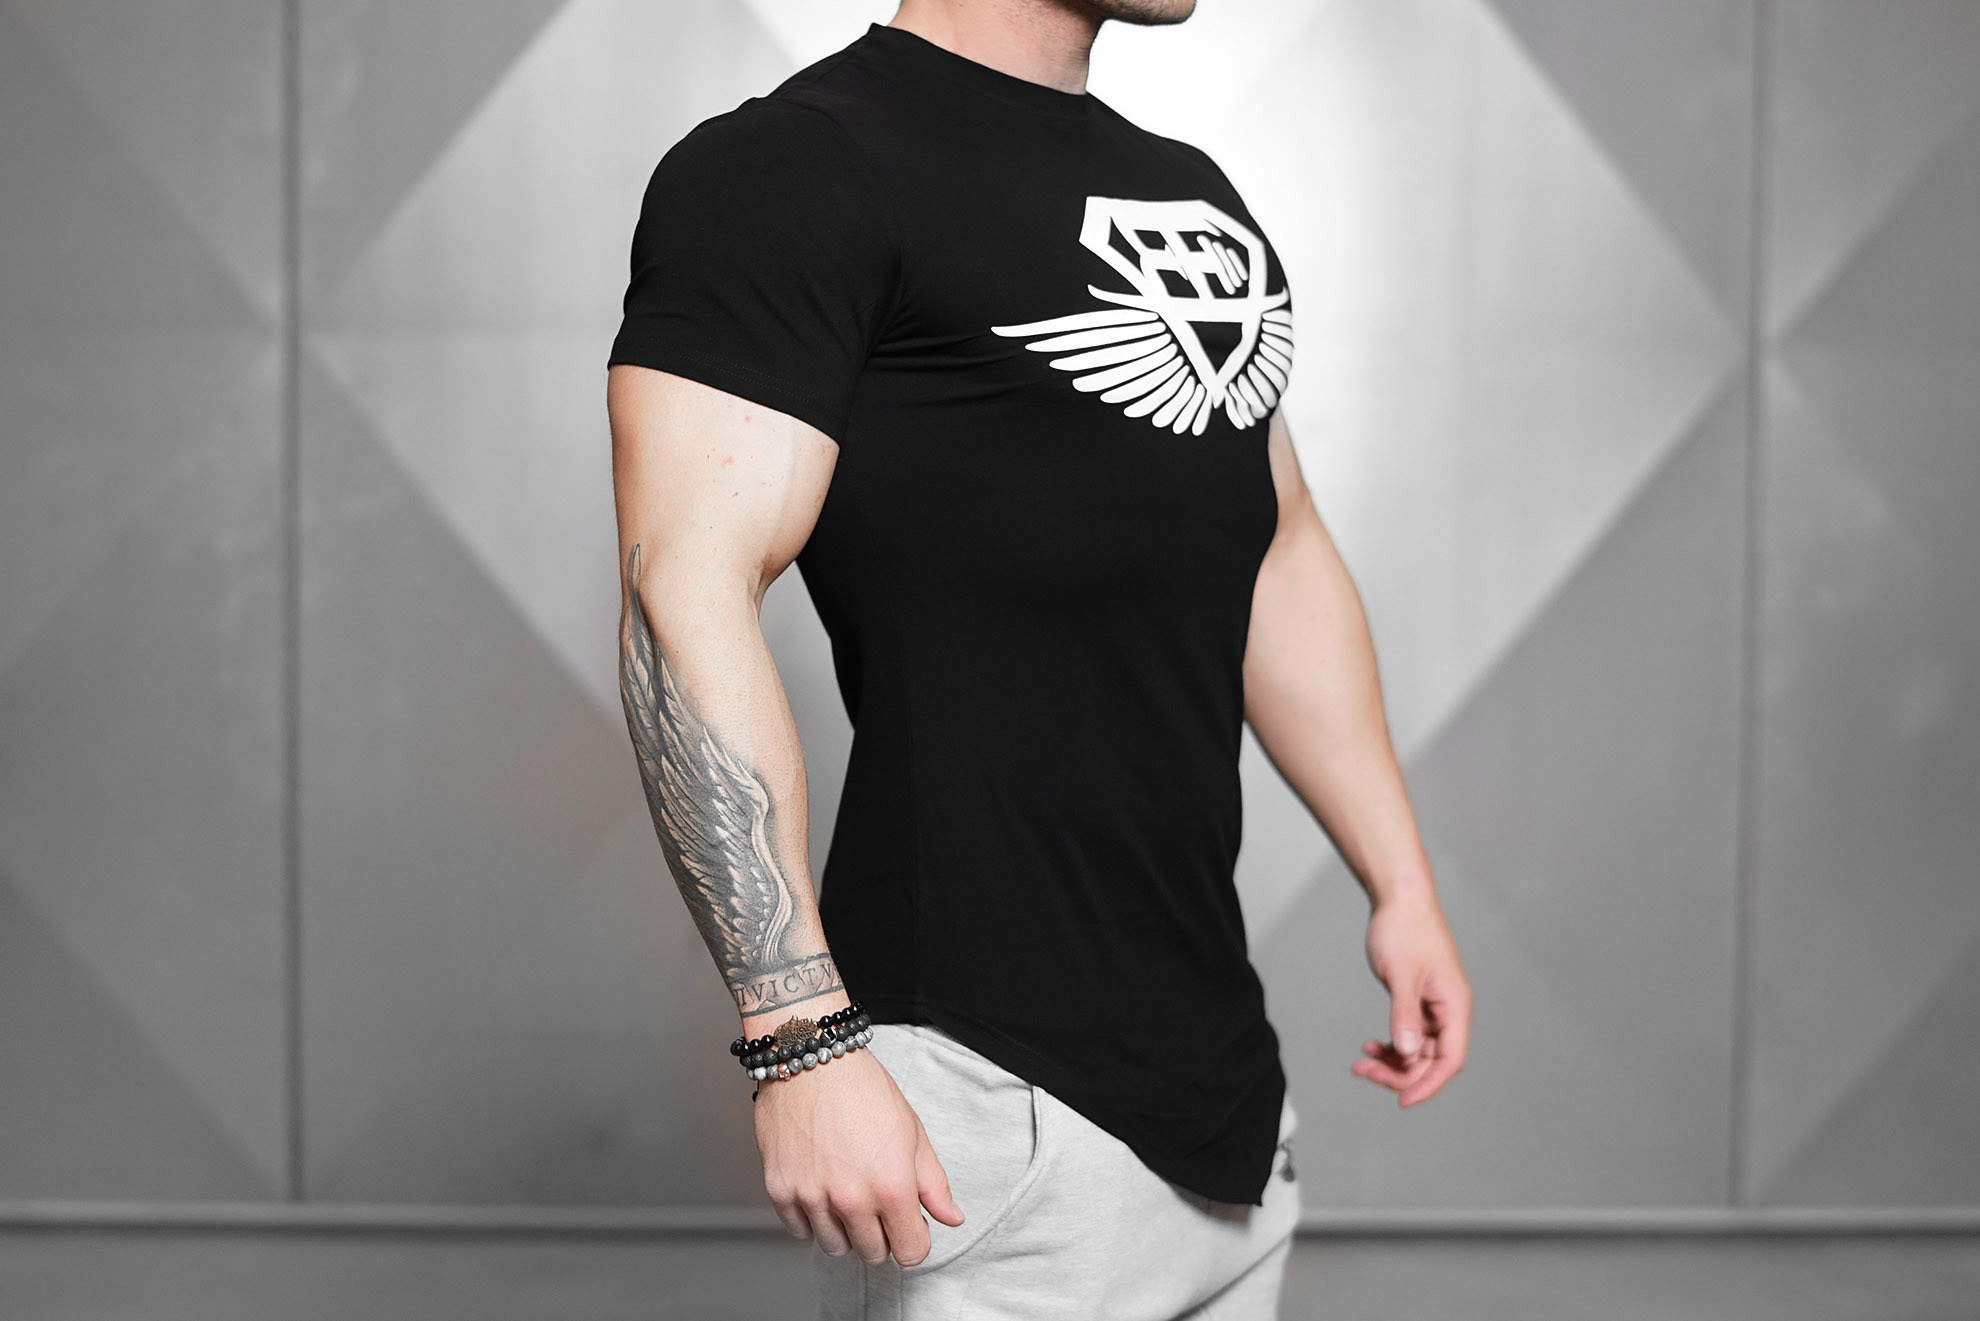 Body Engineers - Buy clothing from www.engineered-life.com